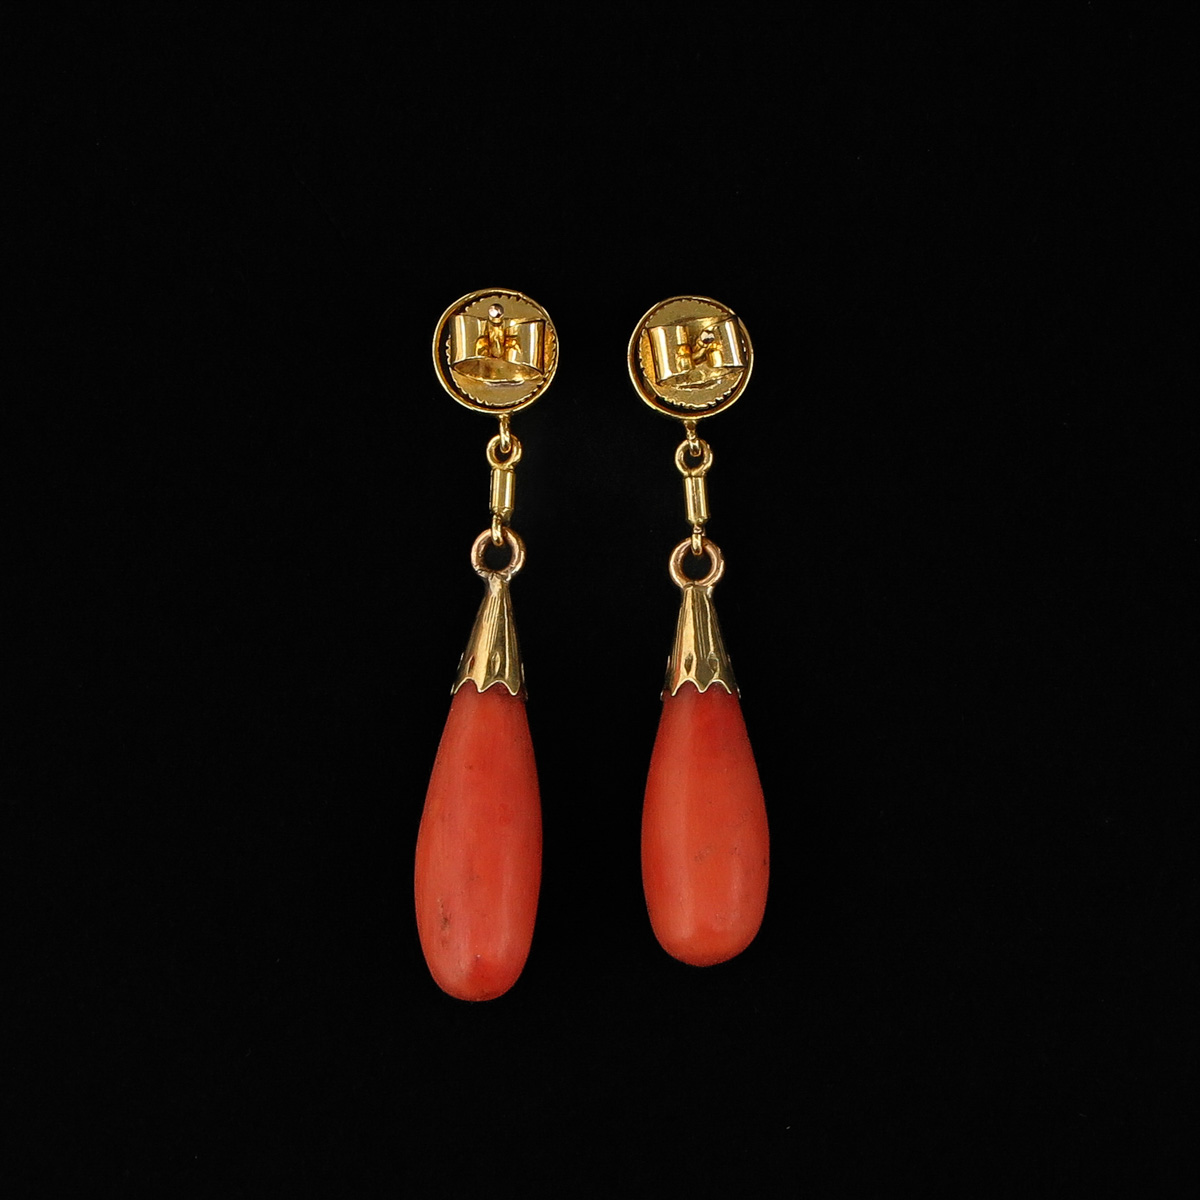 A Pair of Red Coral Earrings - Image 2 of 3